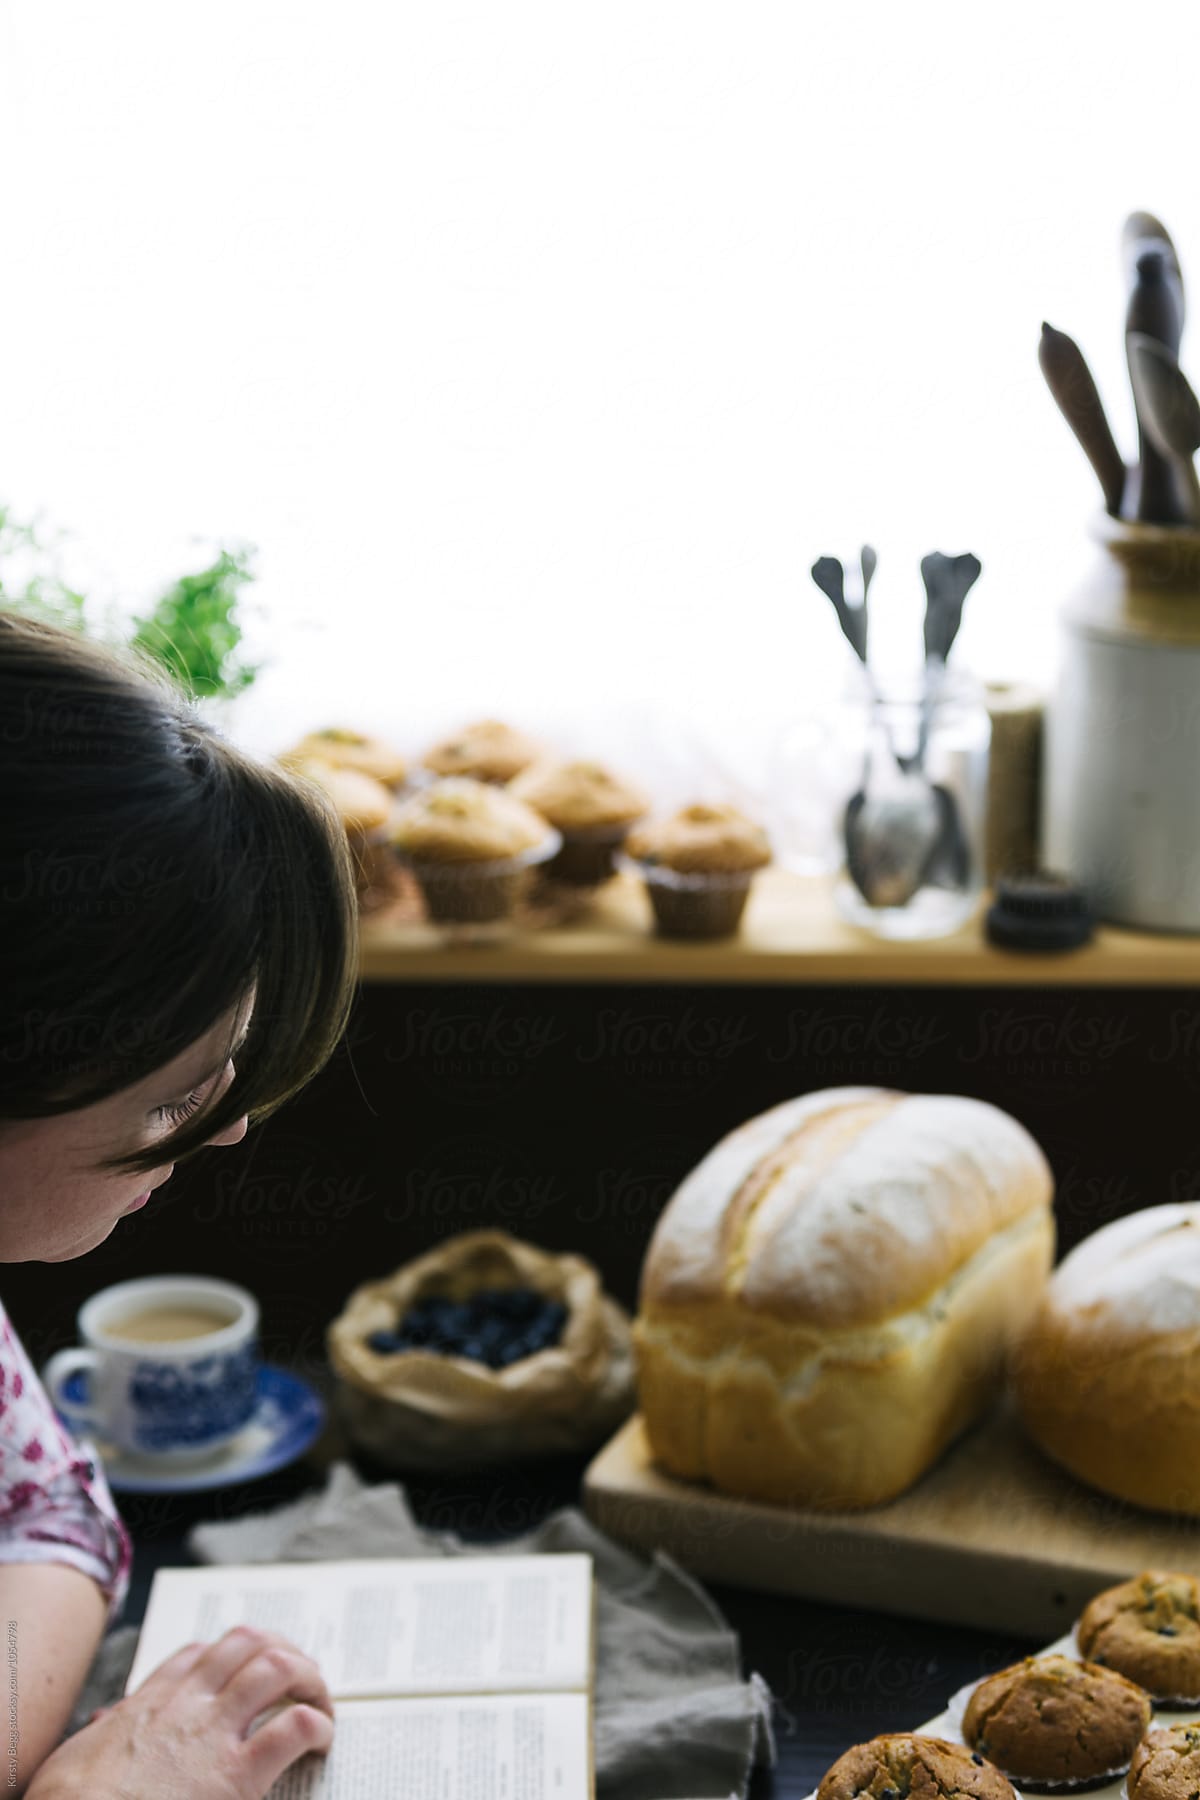 Woman reads old cookery book while bread and muffins cool